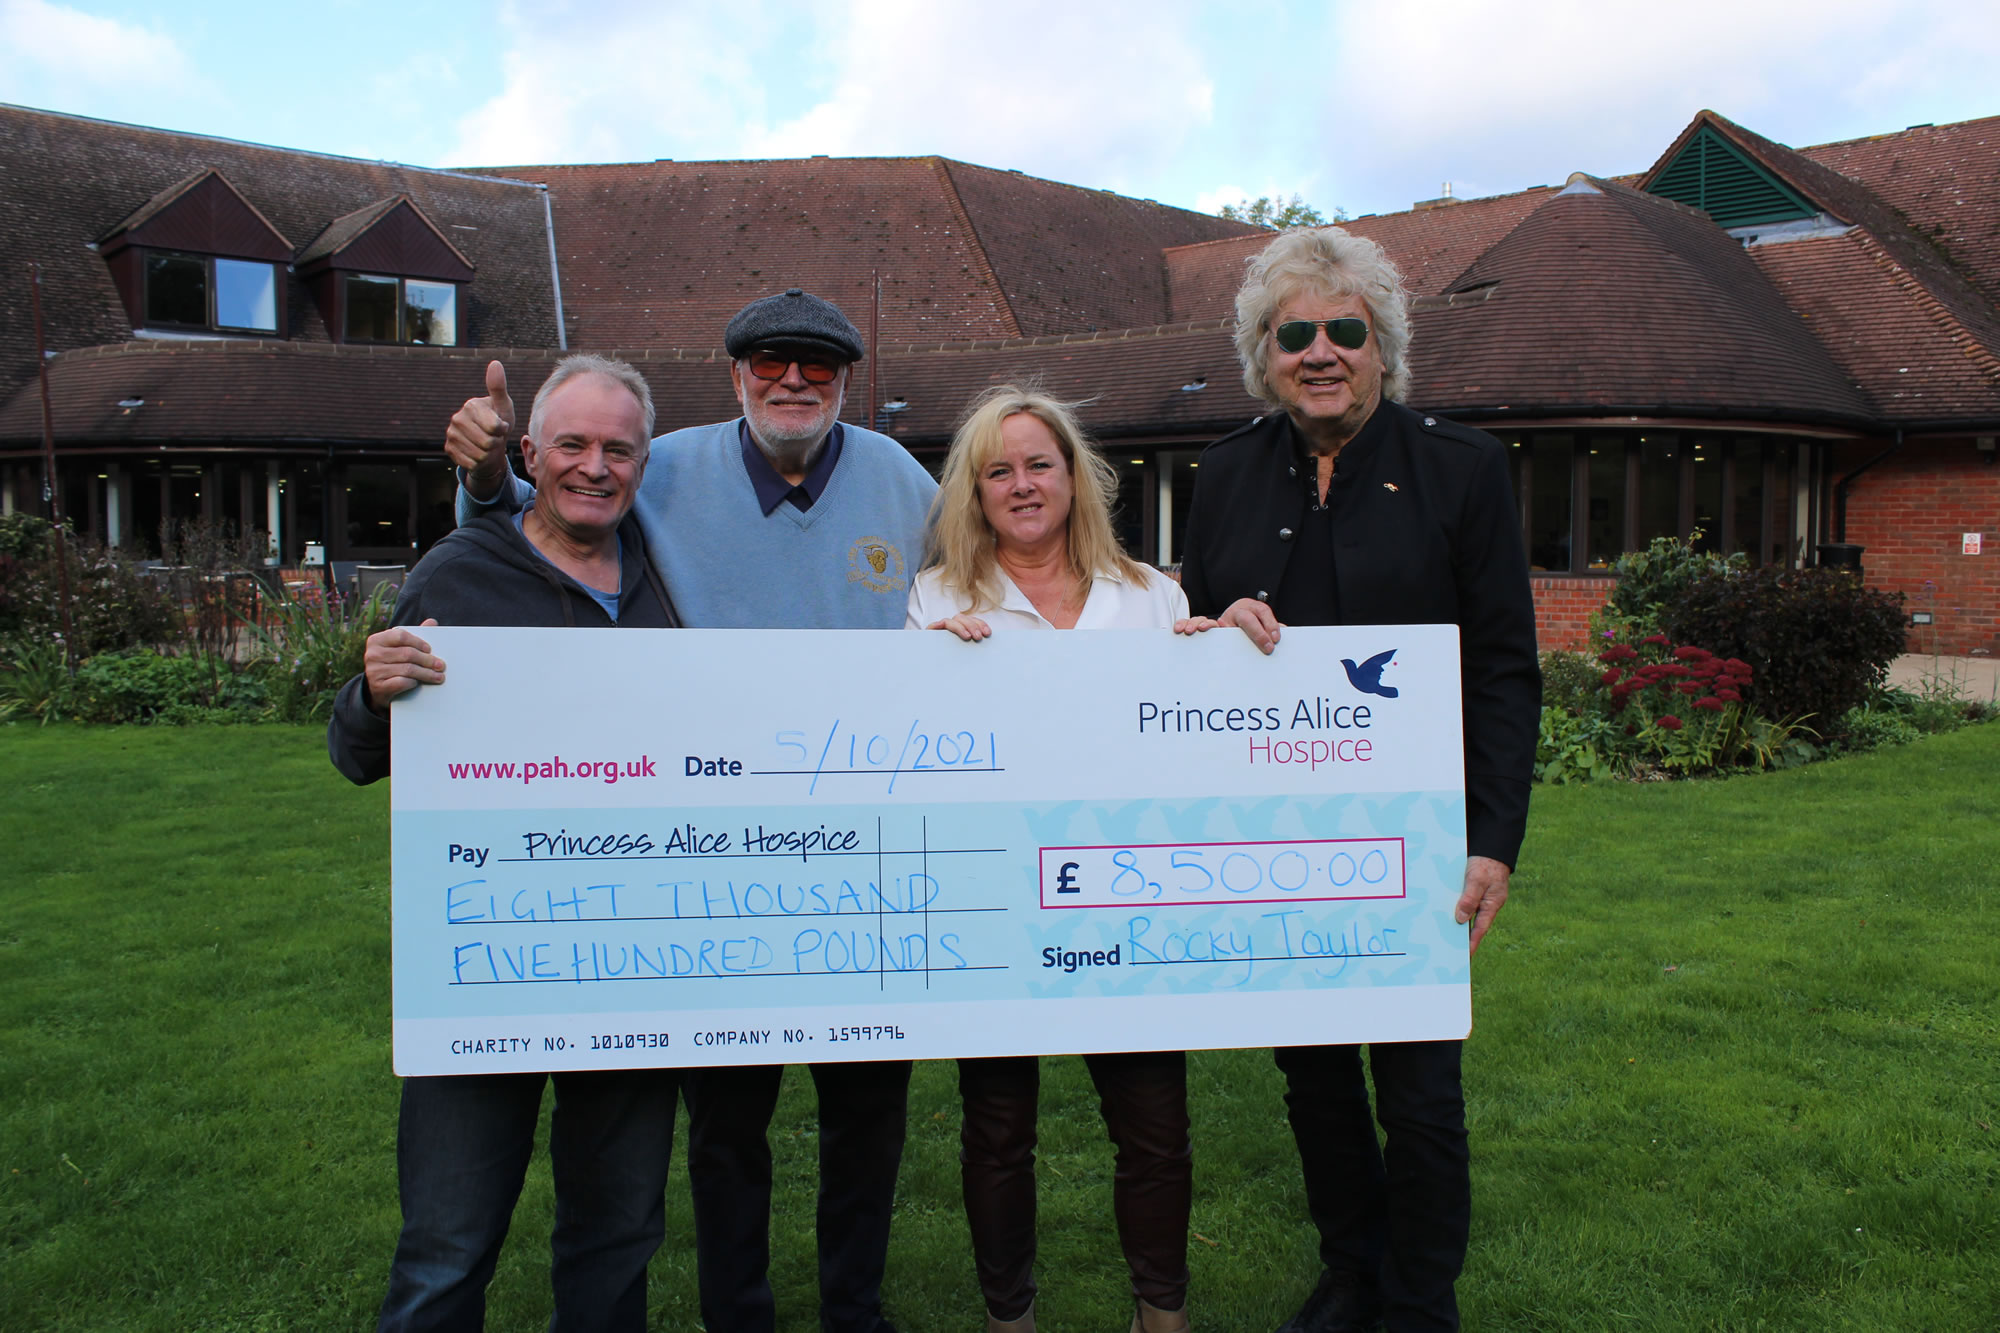 Bobby Davro Rocky Taylor and John Lodge with Claire - Princess Alice Hospice